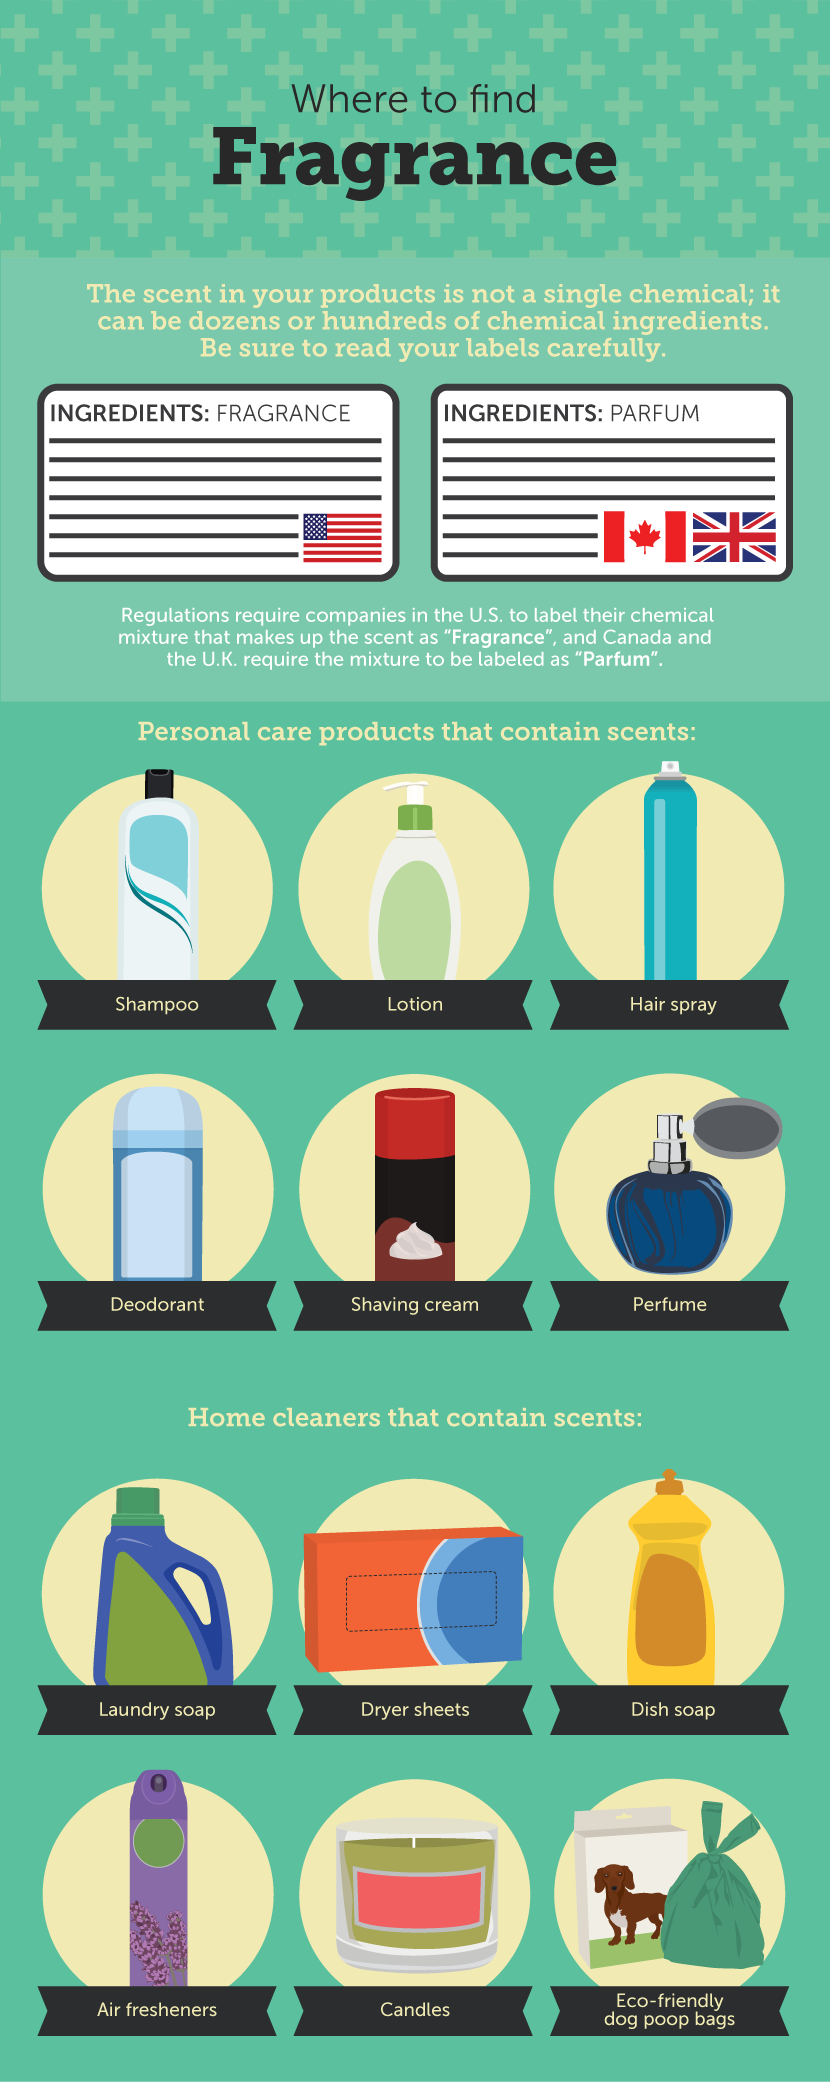 Where to Find Fragrance - Secret Airborne Pollutants in our Homes